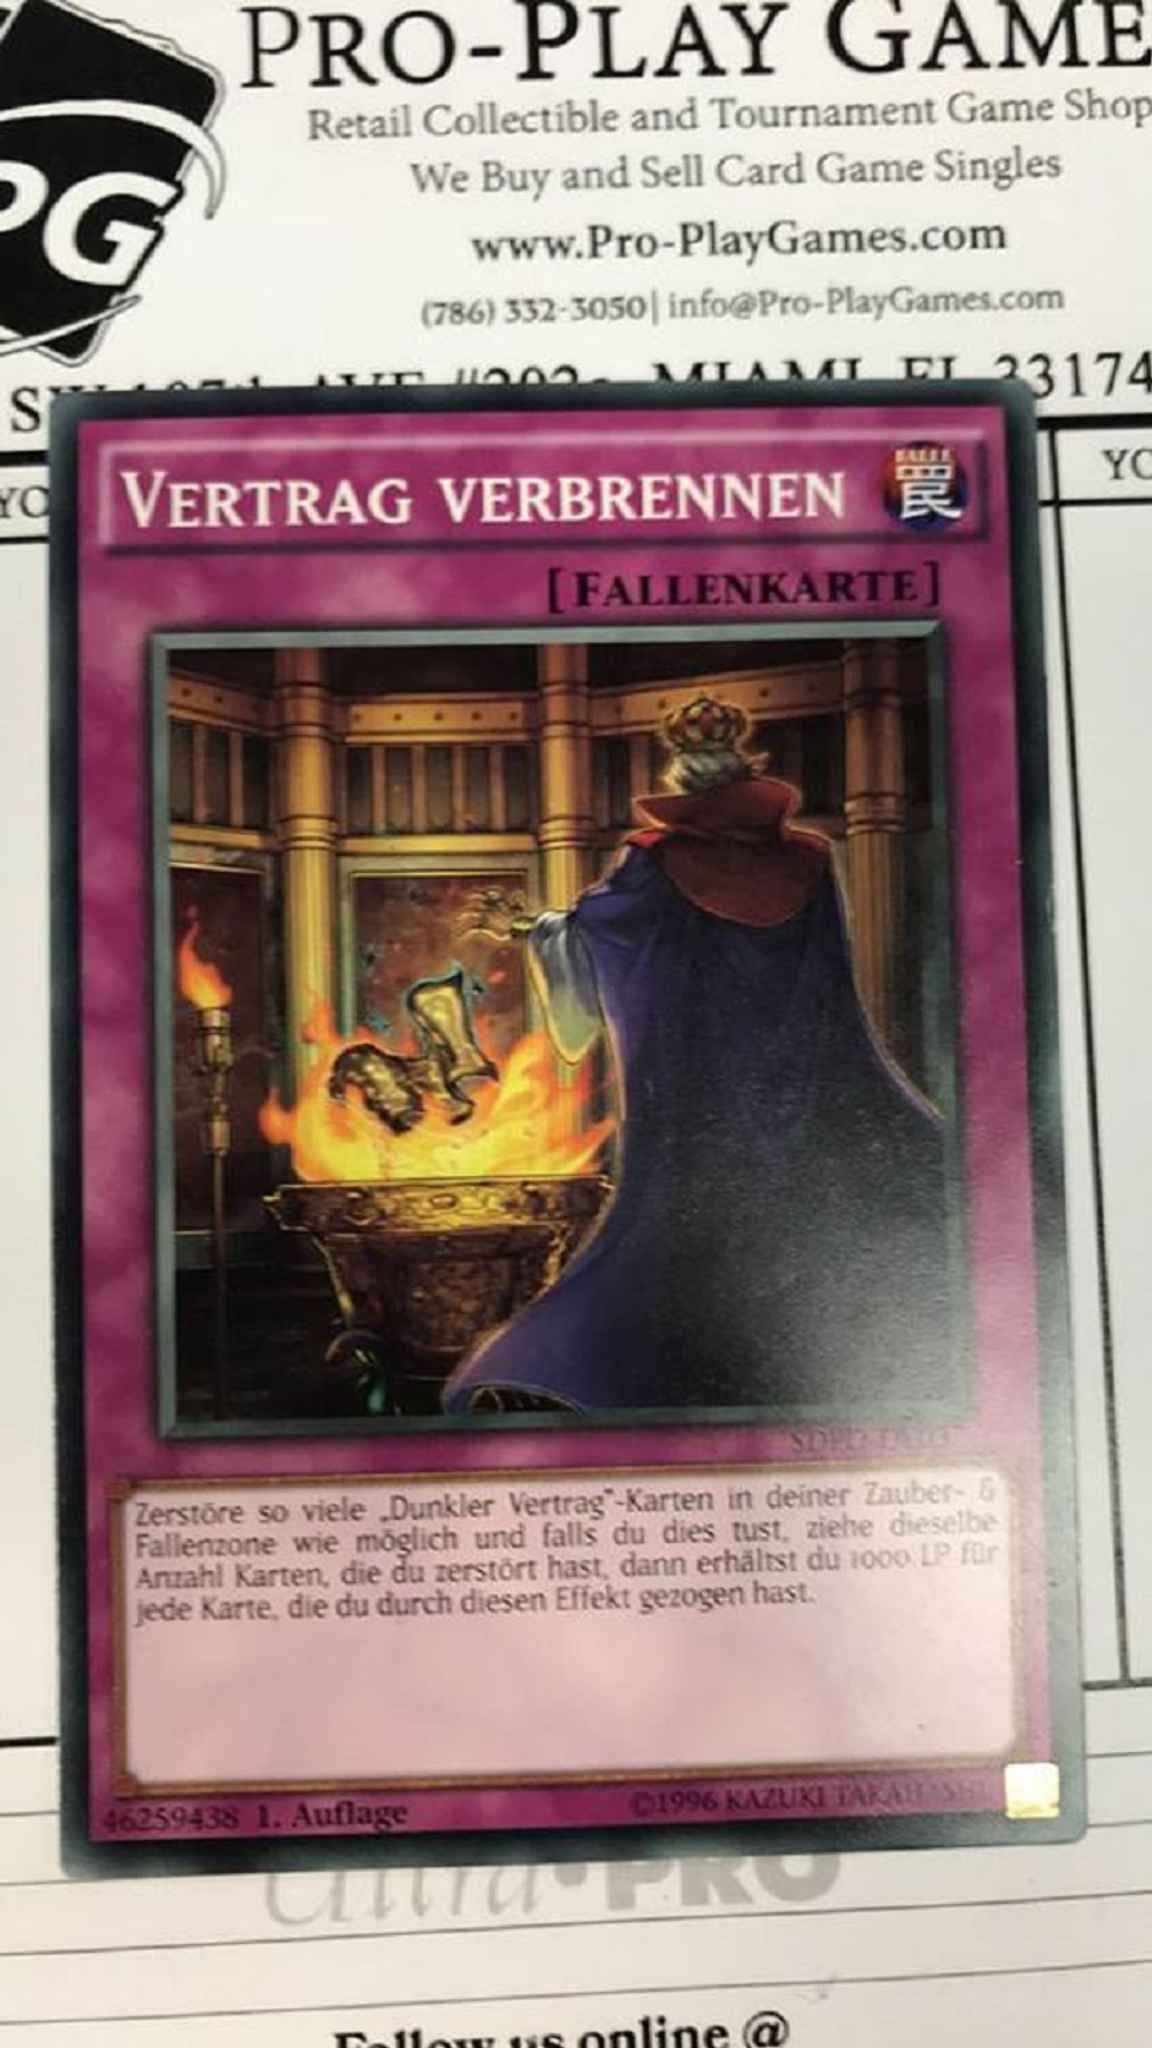 YU-GI-OH CARD SDPD-EN037 1ST EDITION CONTRACT LAUNDERING